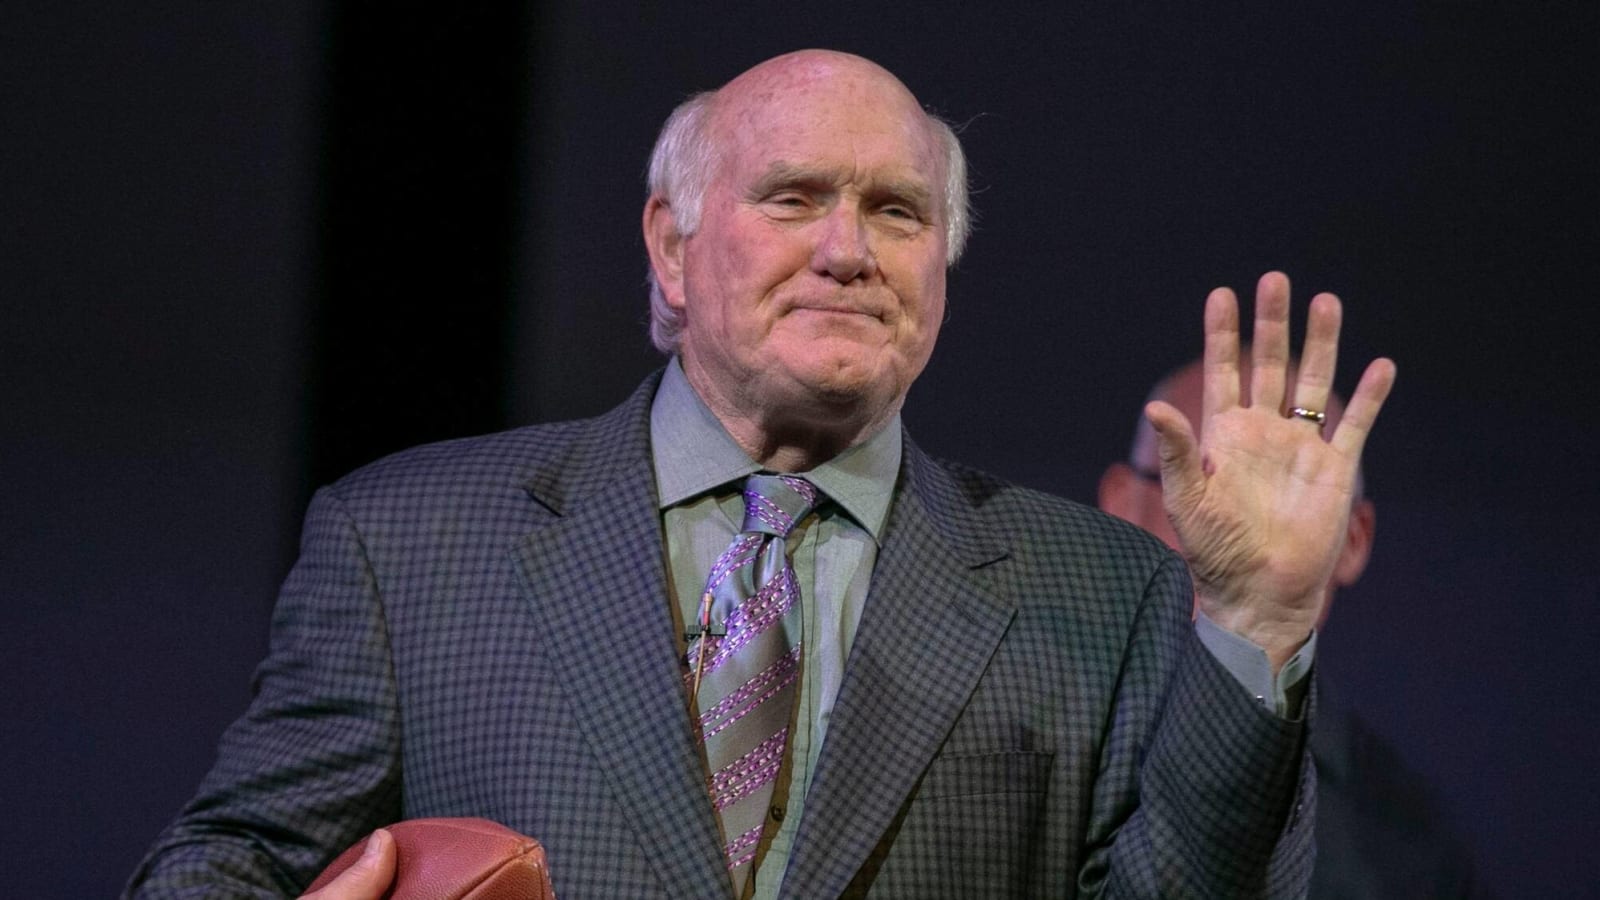 Steelers' Terry Bradshaw Shares 'It Was Best I Stay Away' From John Madden Because Of Legendary Grudge